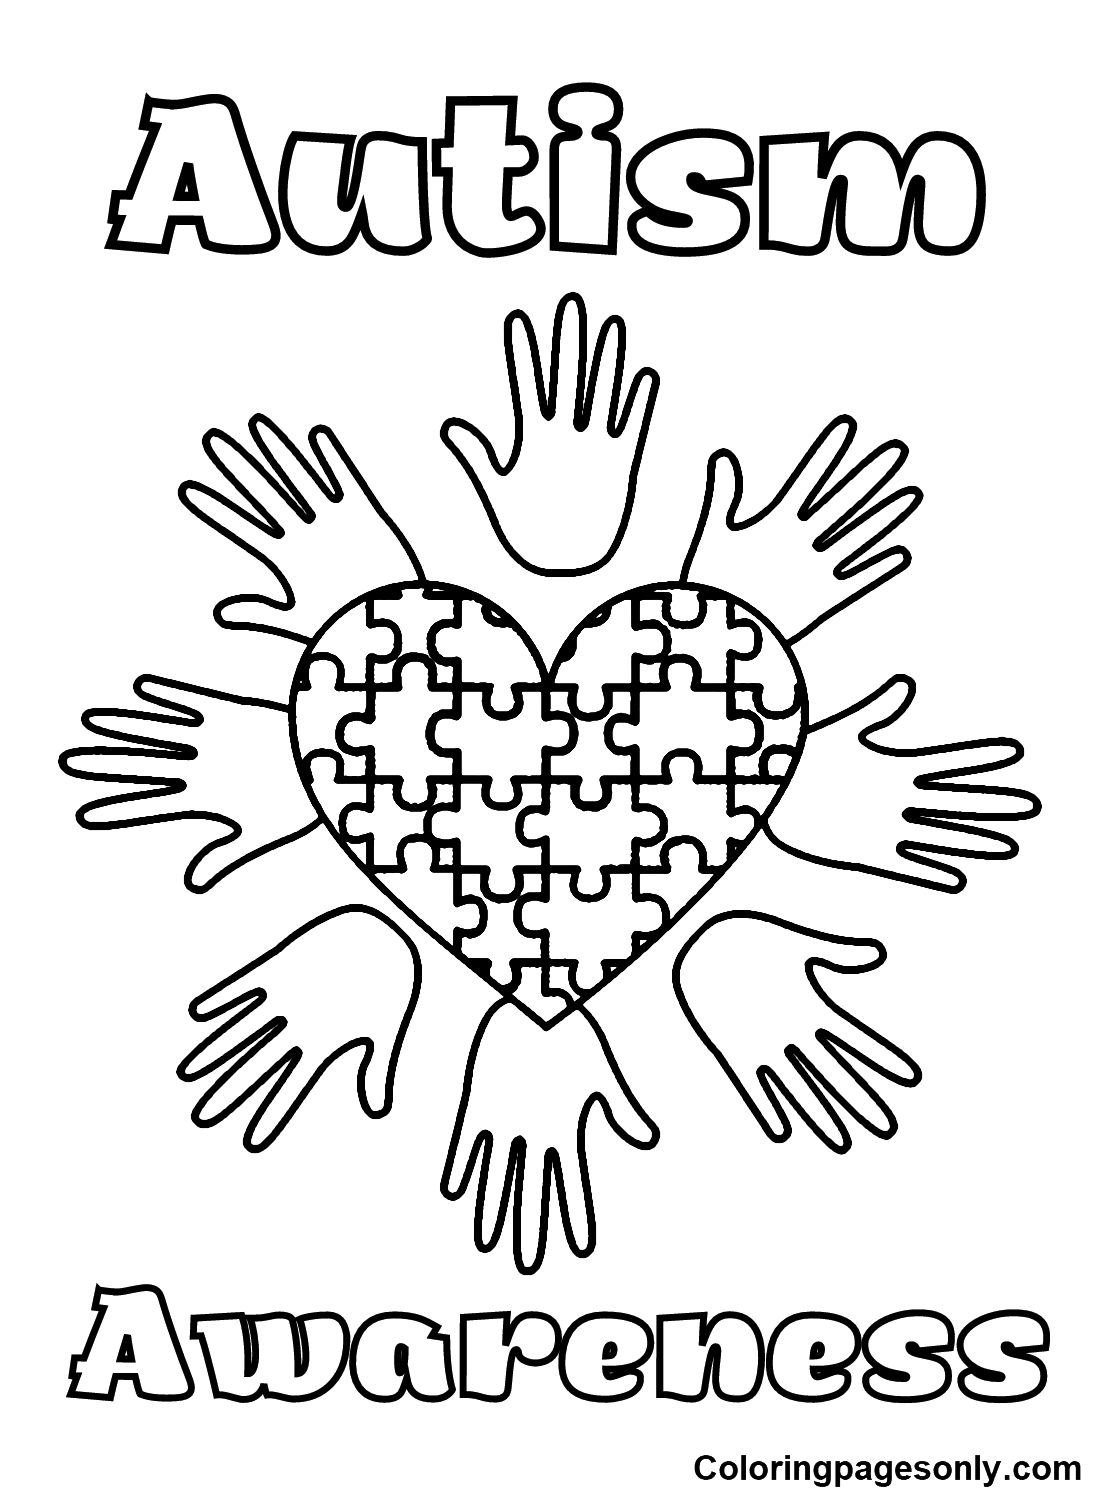 Images Autism Awareness Coloring Pages